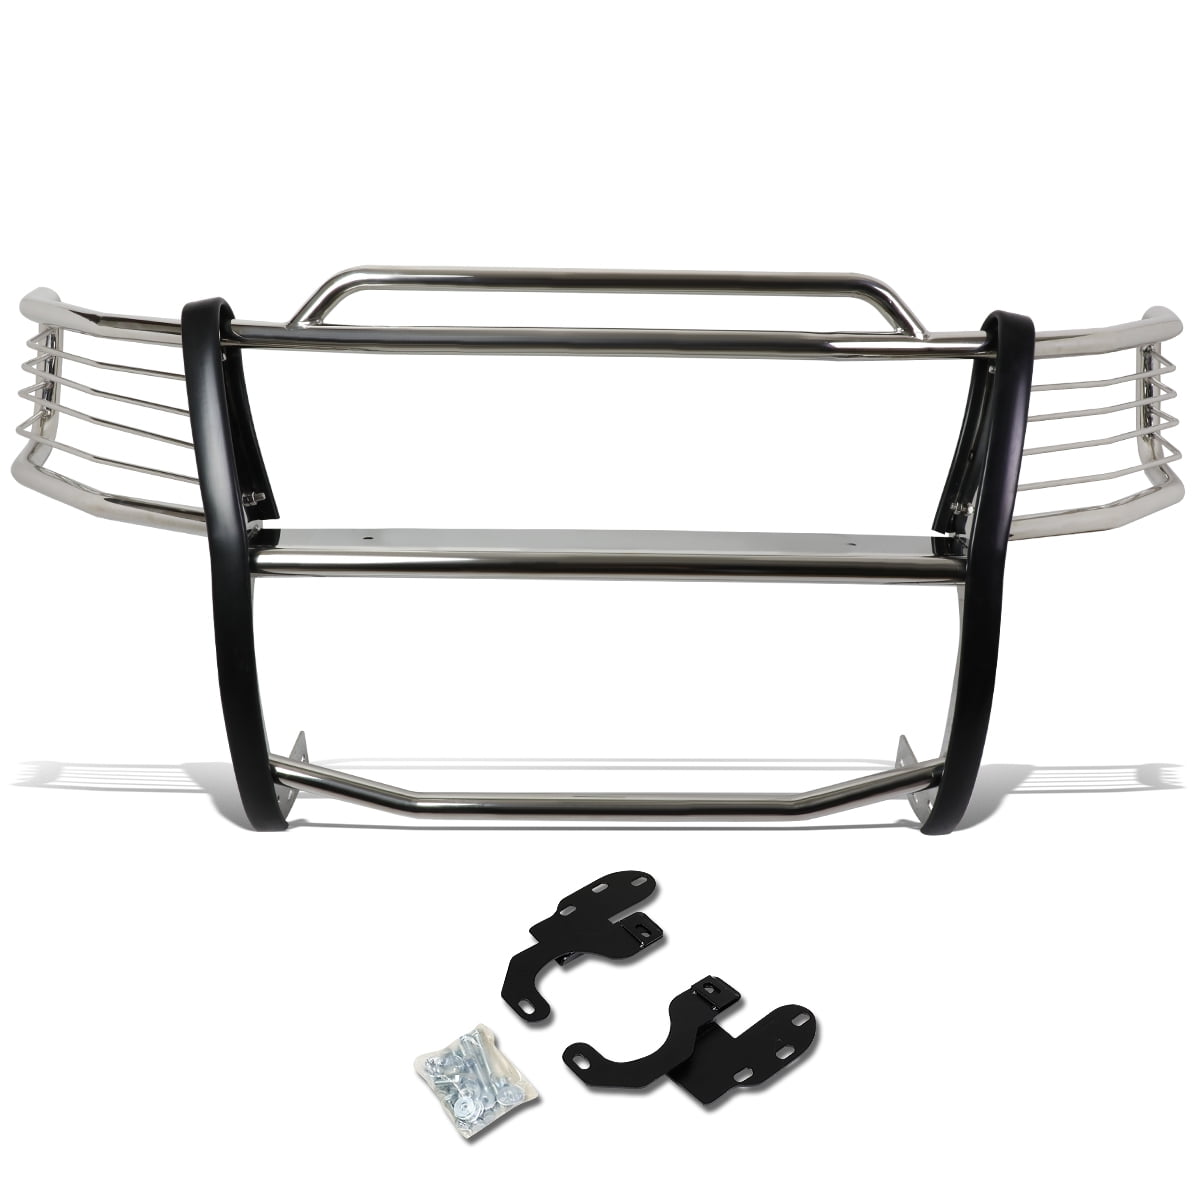 Details about   For 99-02 Expedition 99-03 Ford F150 F250 Light Duty Front Bumper Bar Chrome